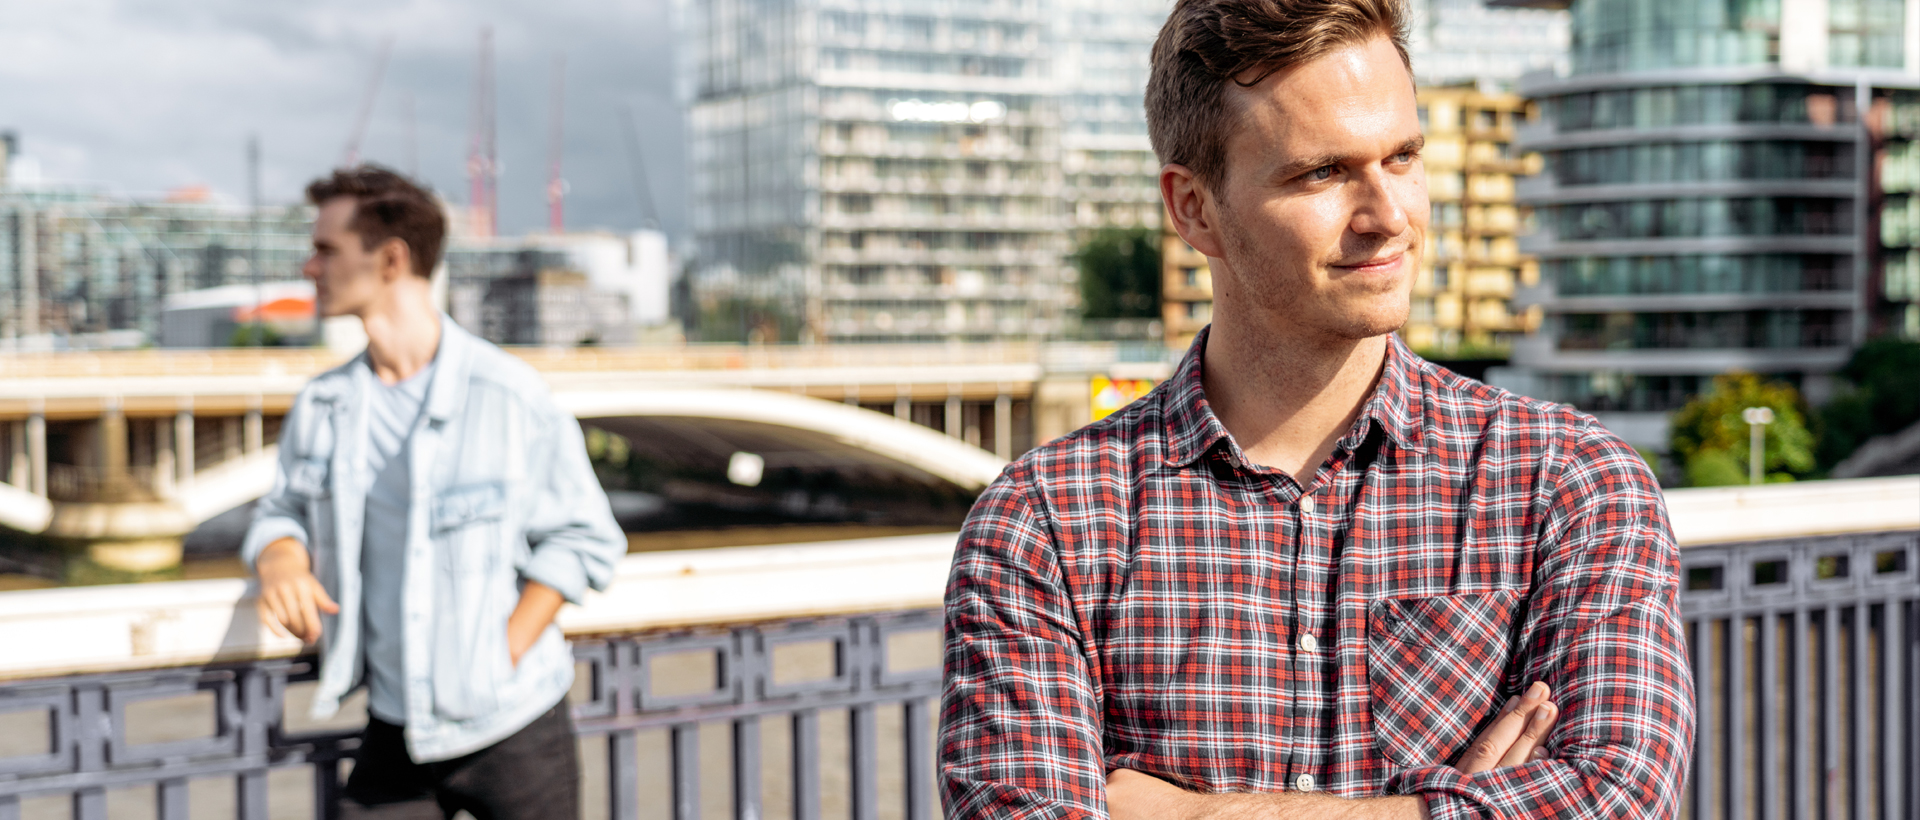 Image of two men standing on a bridge looking away from each other not speaking.